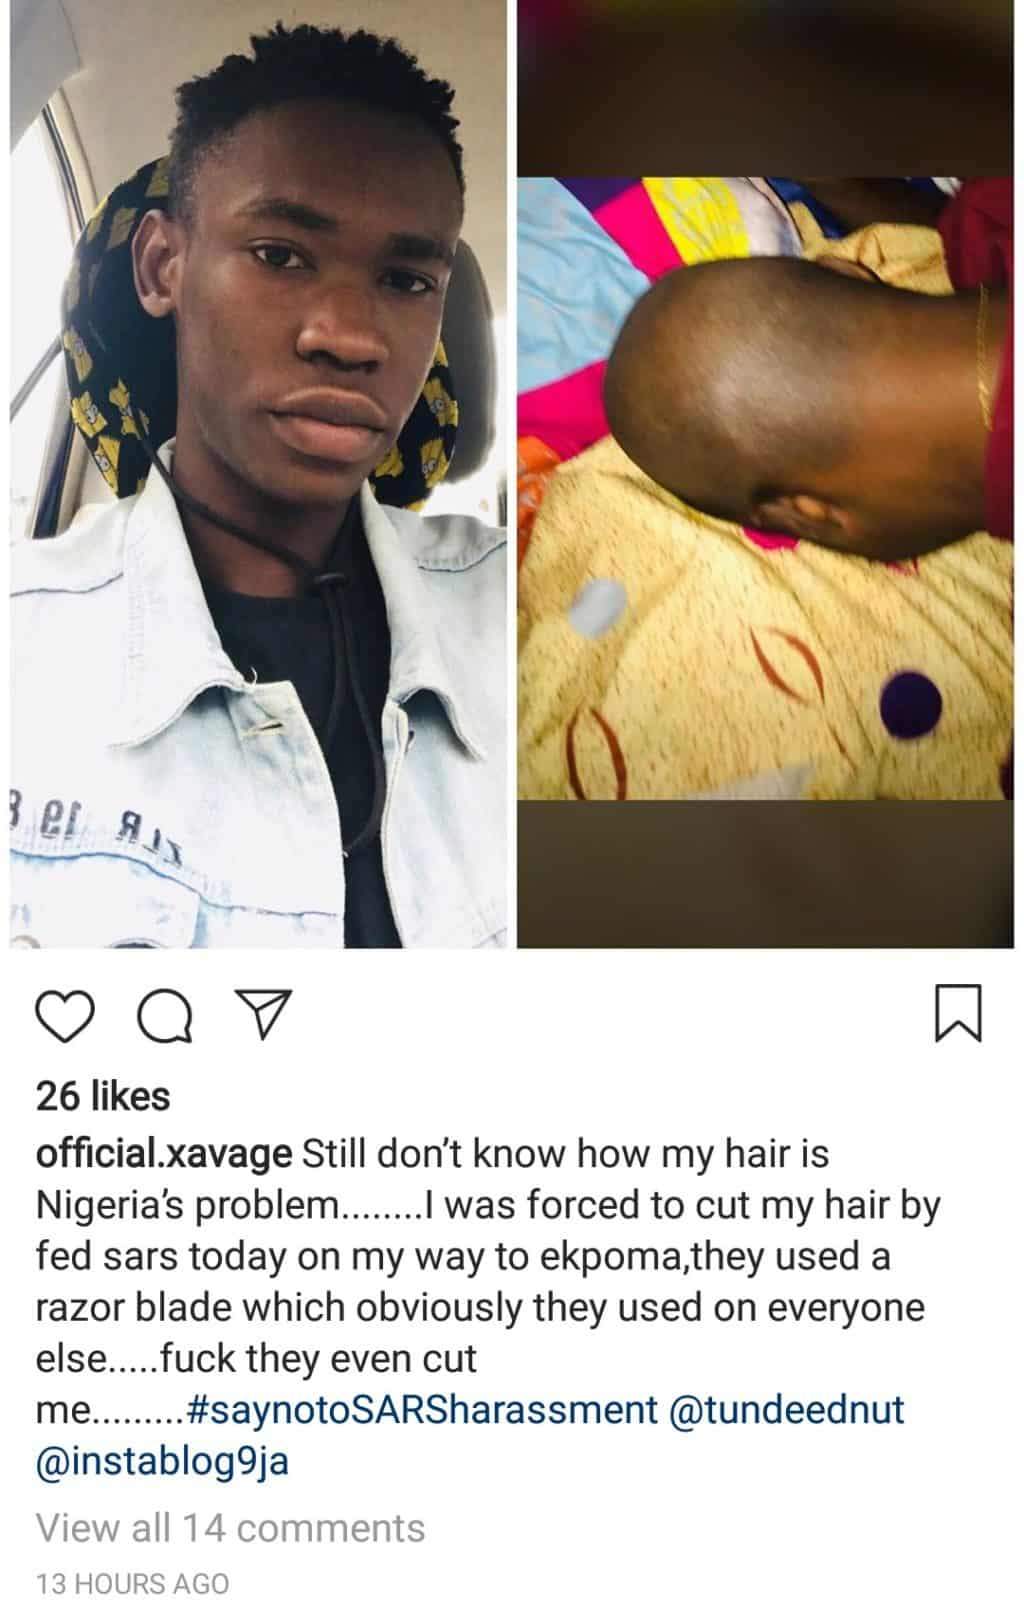 Boy reveals how officers of SARS shaved his hair with an unsterilized blade